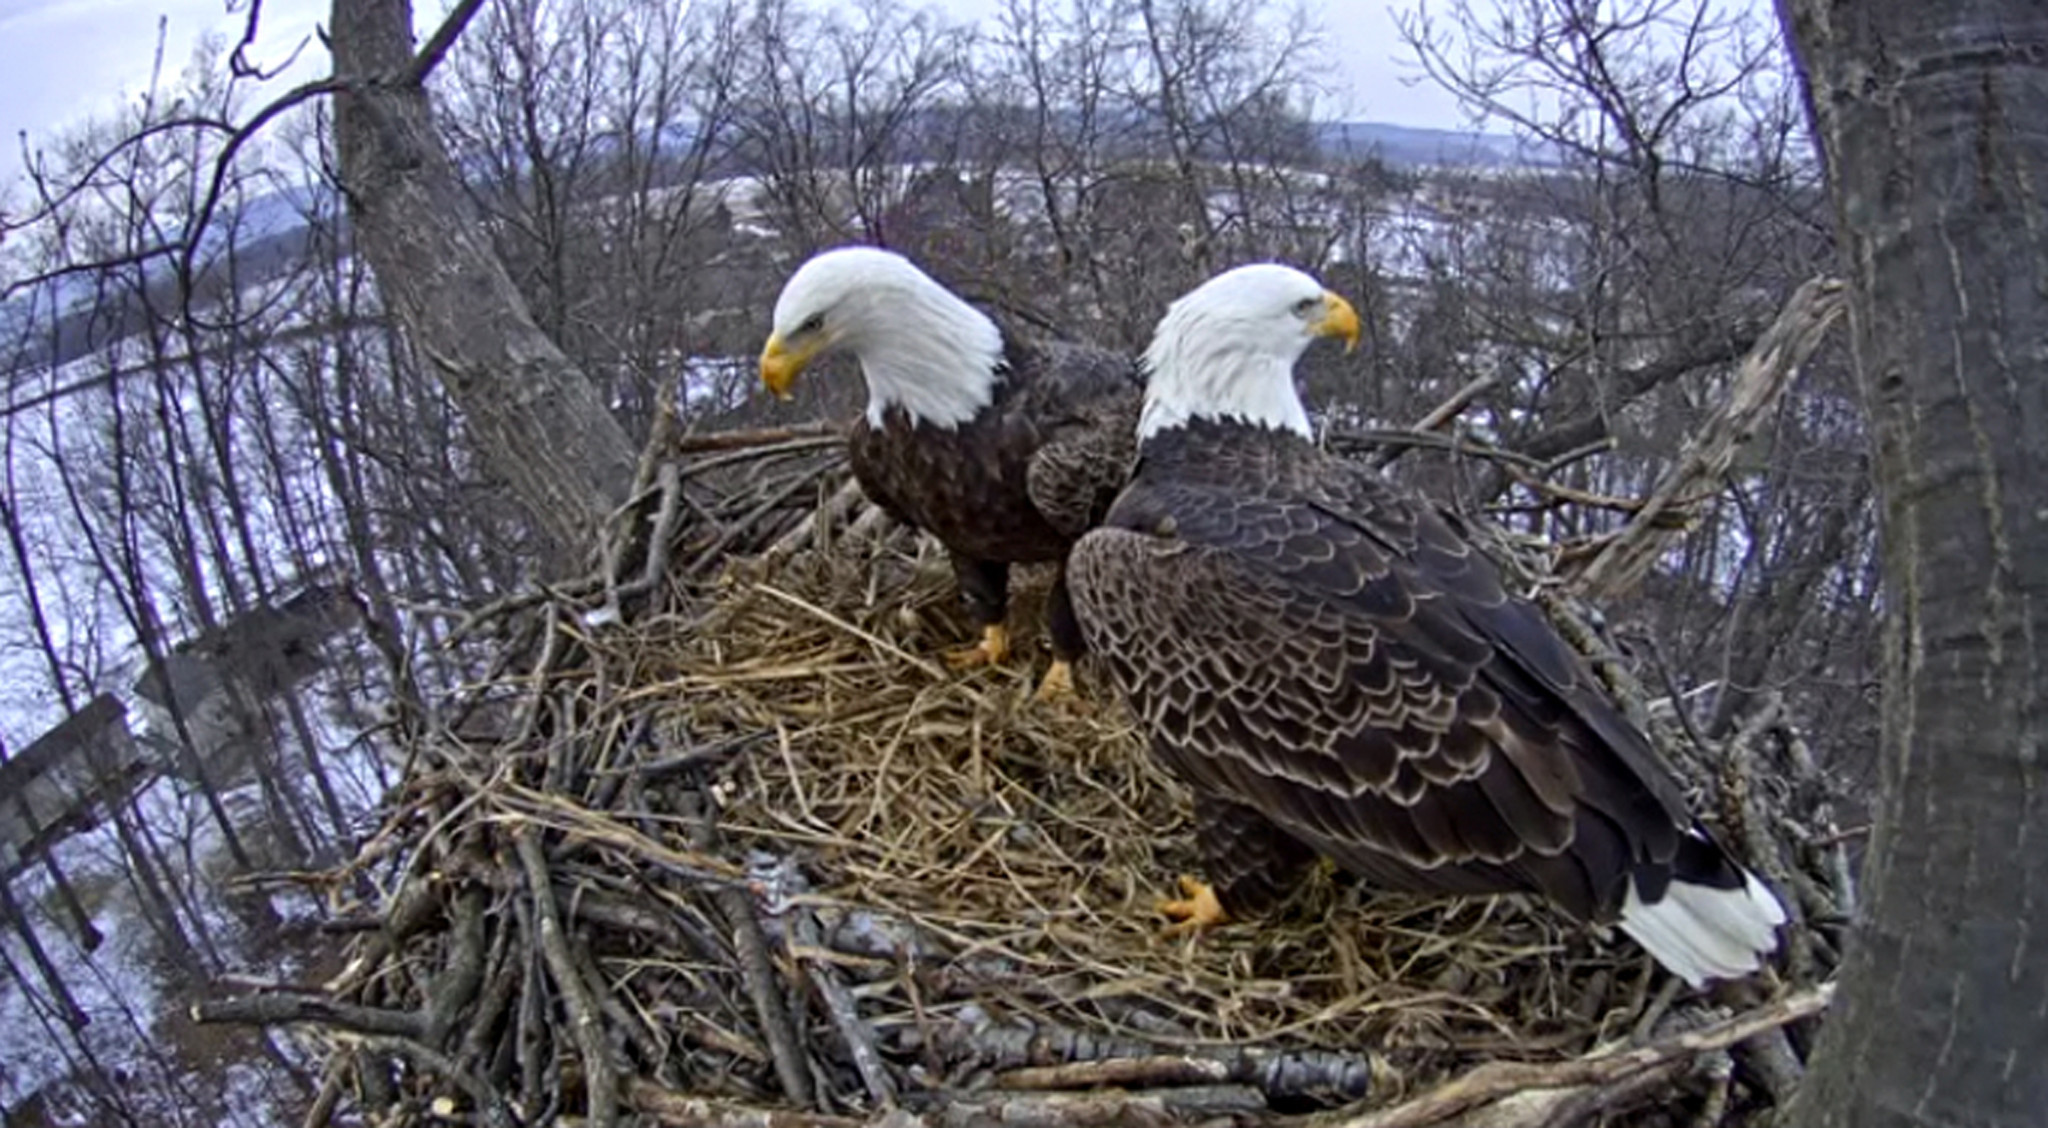 Hanover eagle nest partially collapses ahead of cam shutdown - The Morning Call2048 x 1128